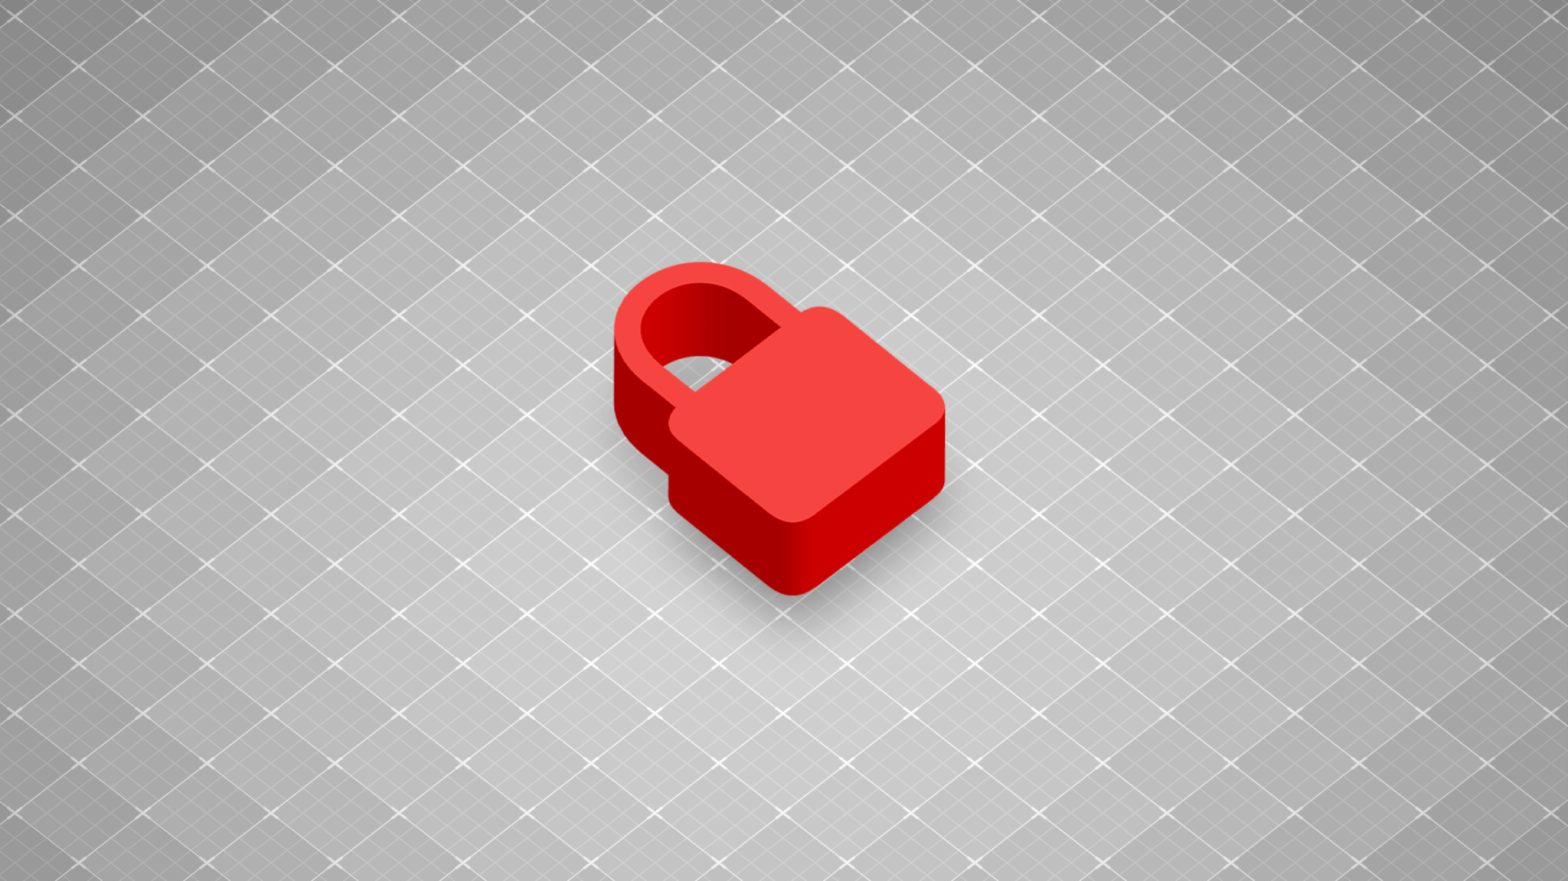 A red lock icon set against a background of gray grids oriented diagonally.